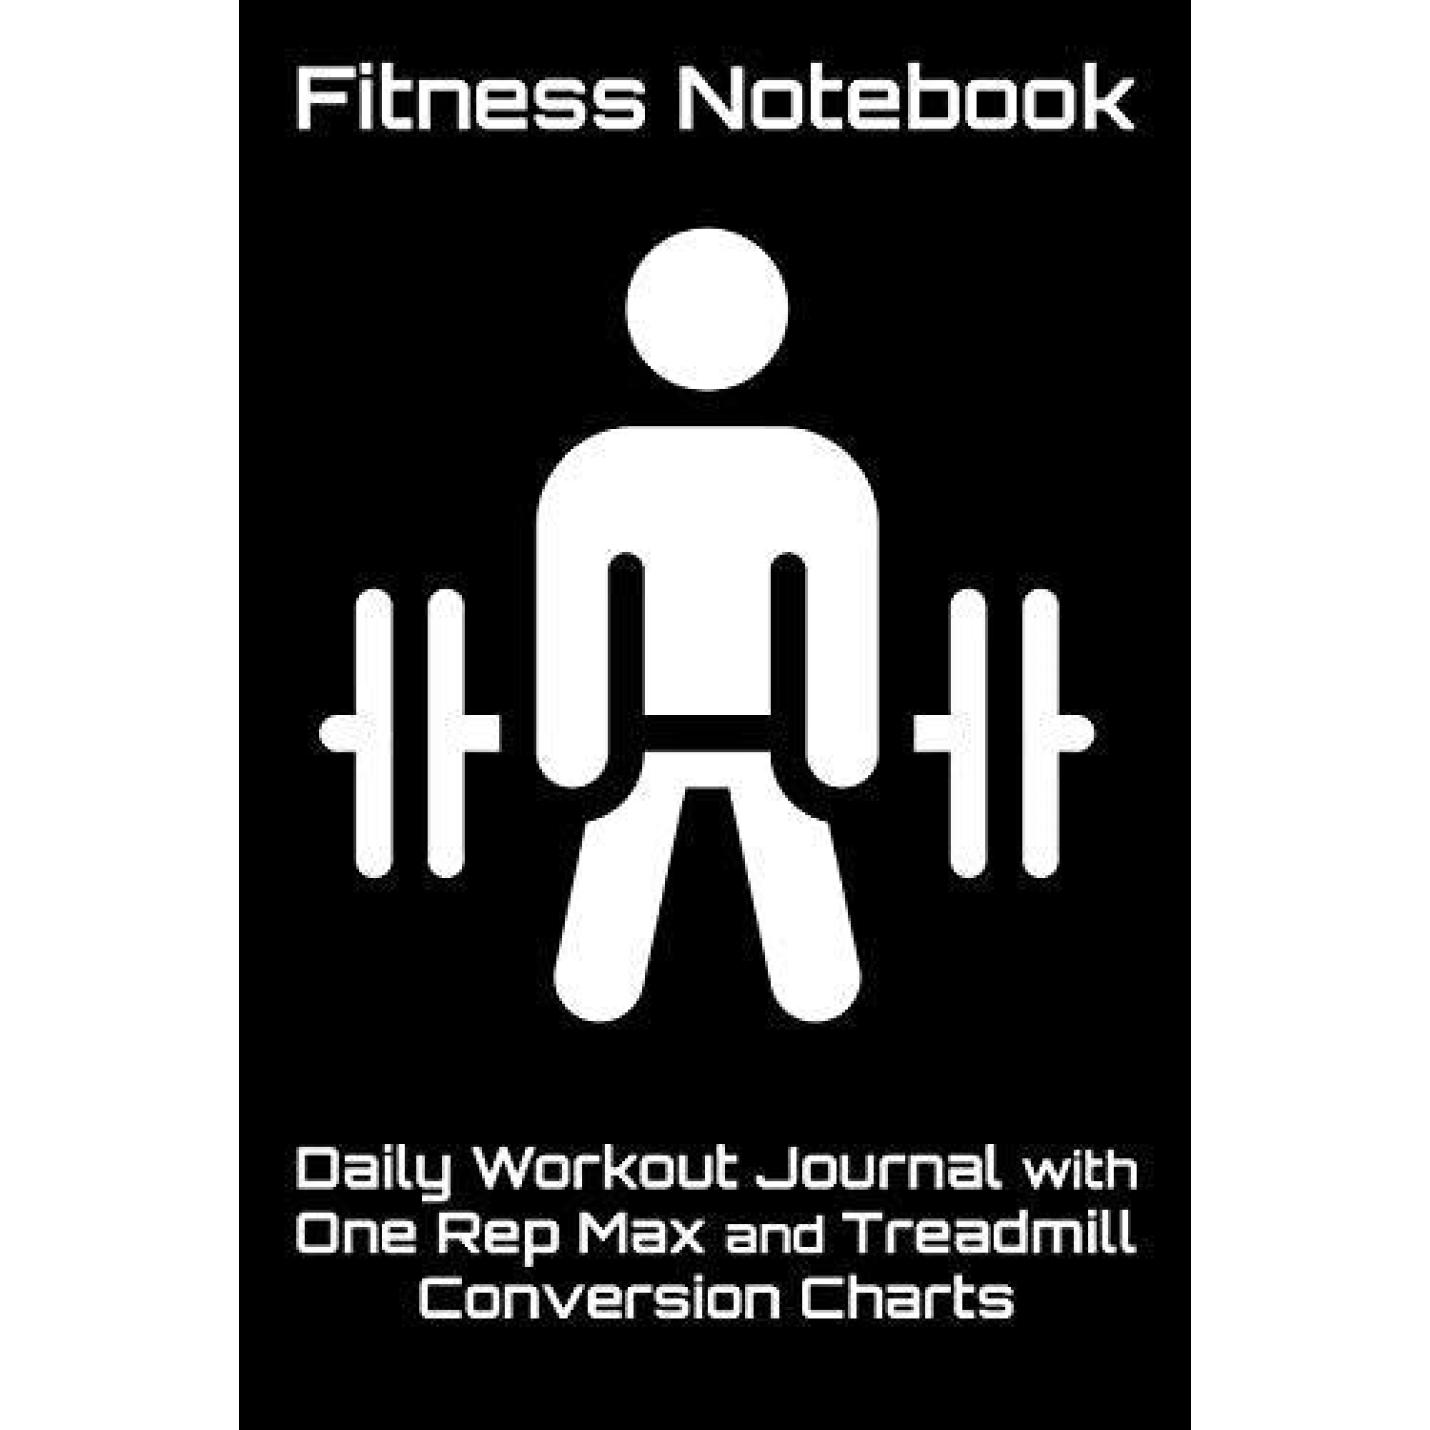 Fitness Notebook: Daily Workout Journal with One Rep Max and Treadmill Conversion Charts (Black) Paperback